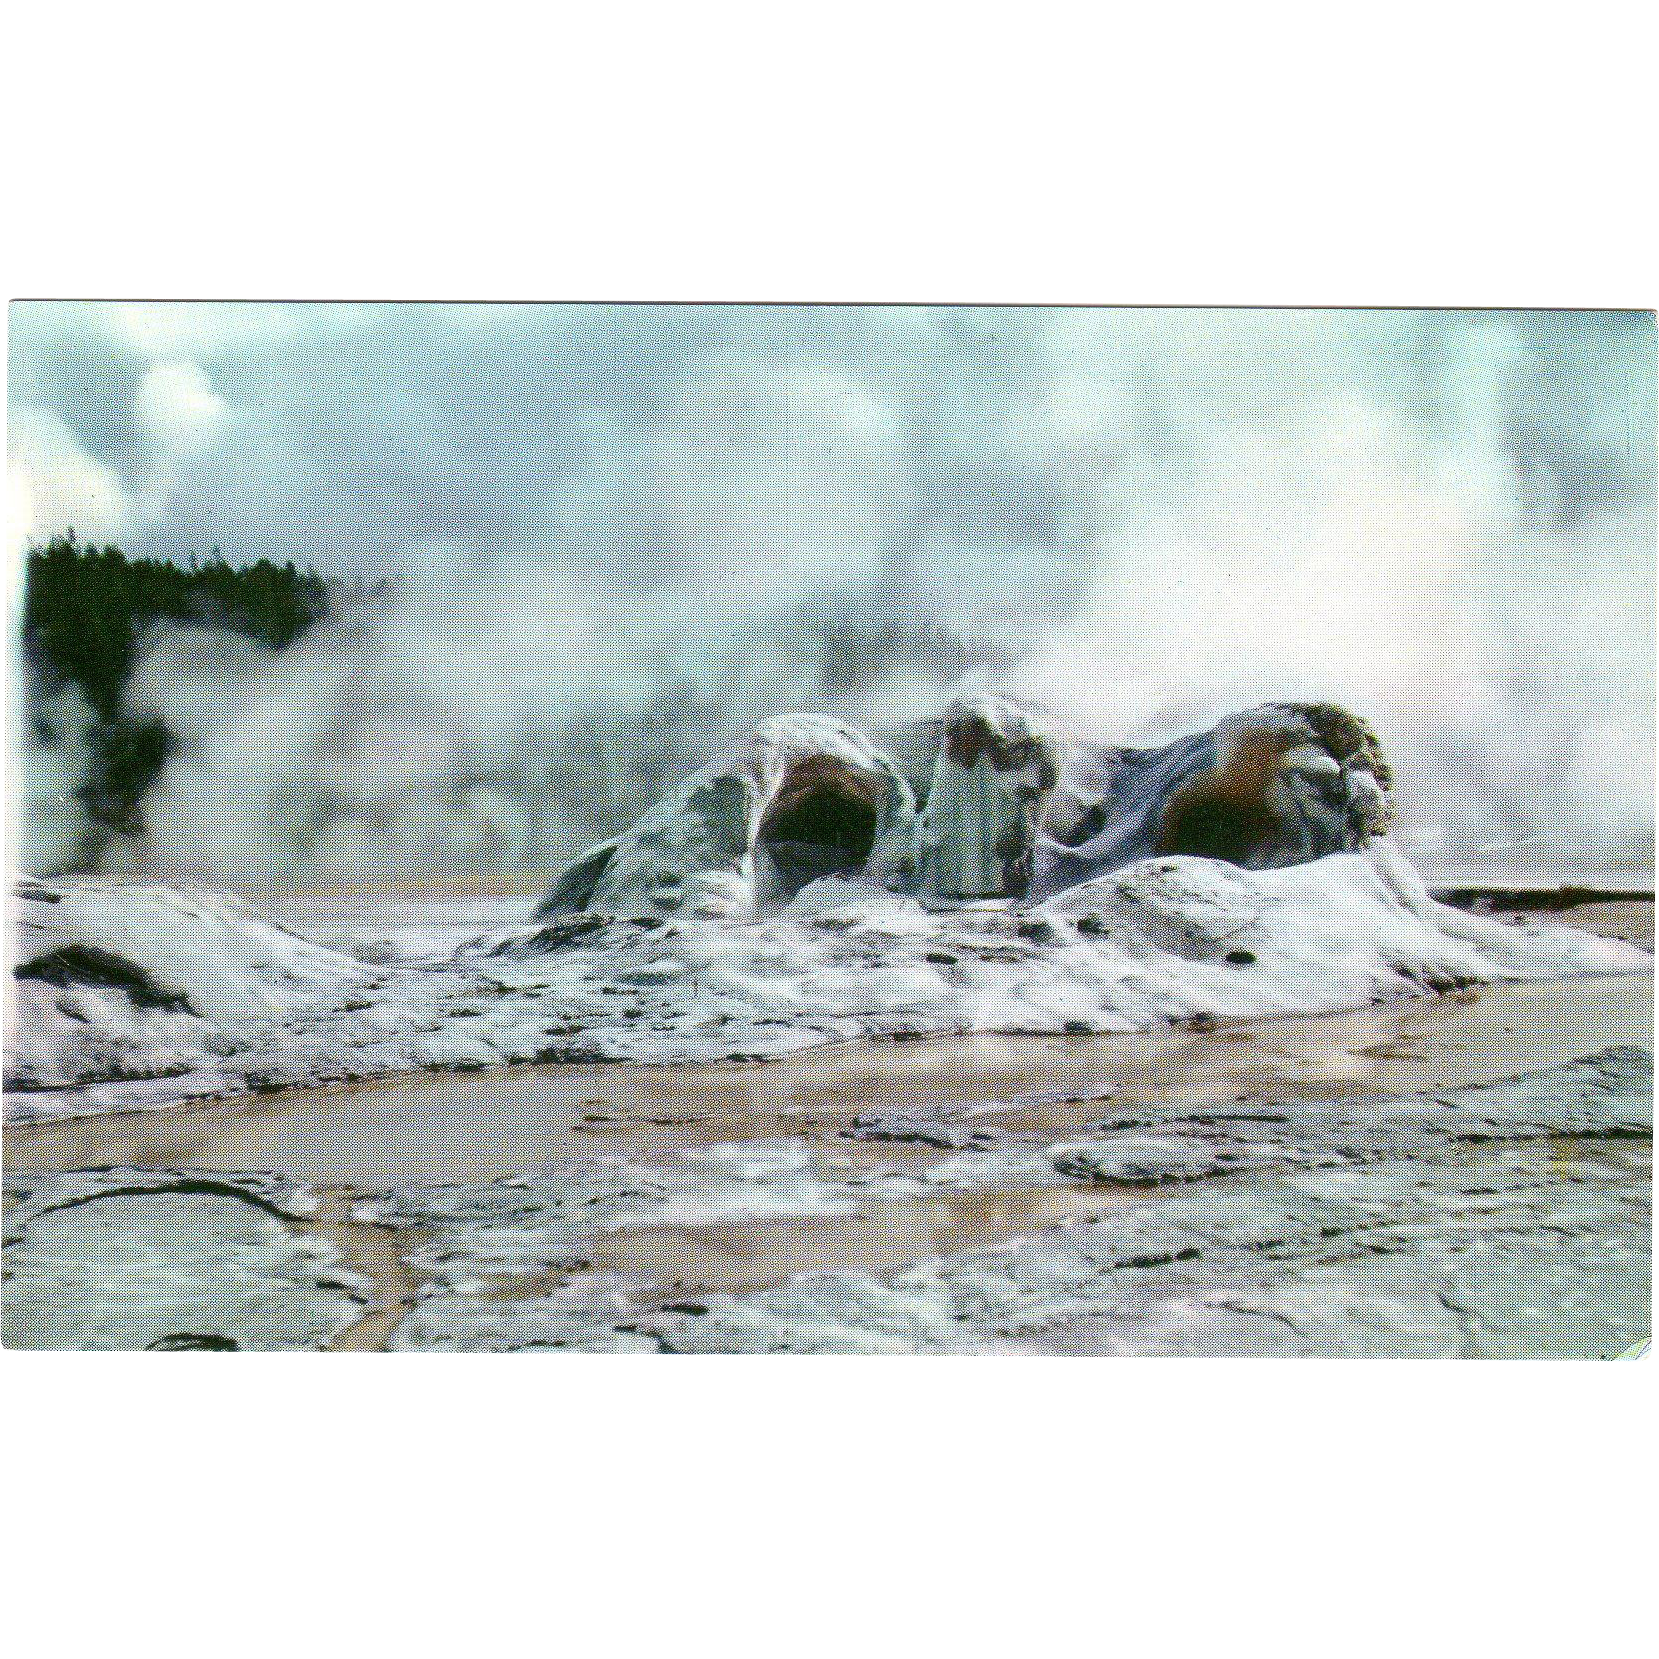 Grotto Geyser Cone Yellowstone National Park Wy Wyoming Vintage From